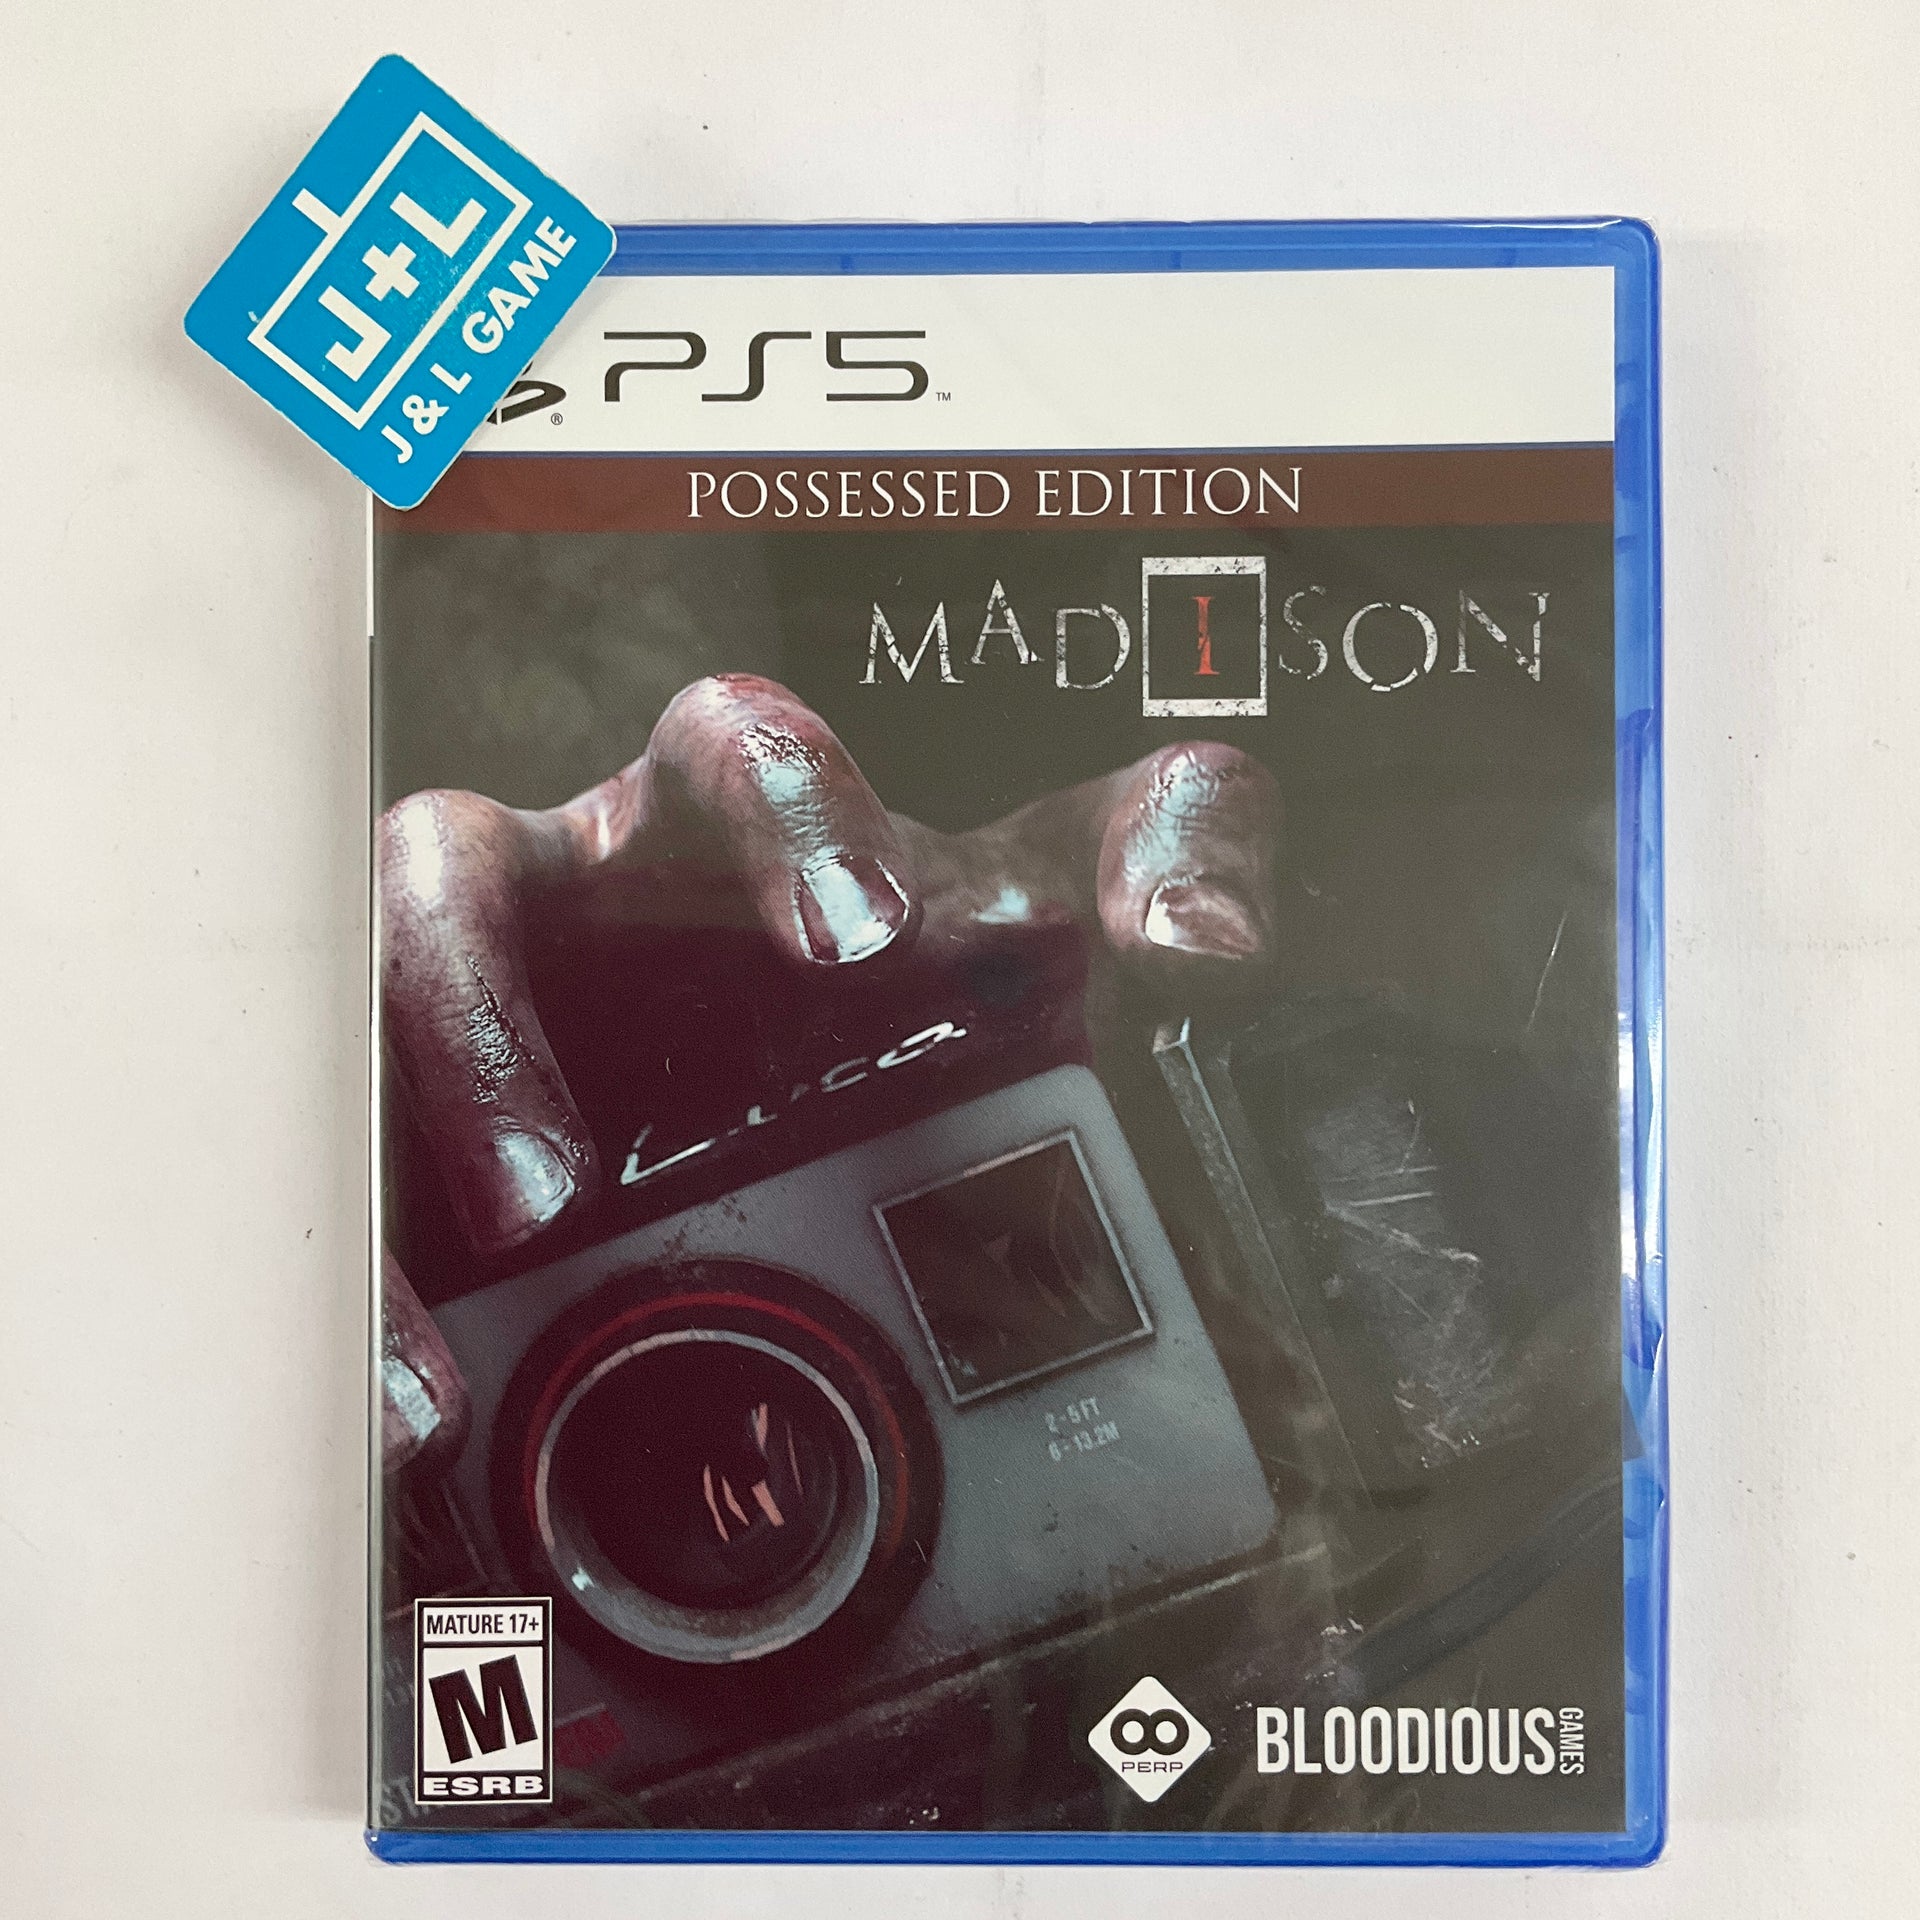 MADiSON (Possessed Edition) - (PS5) PlayStation 5